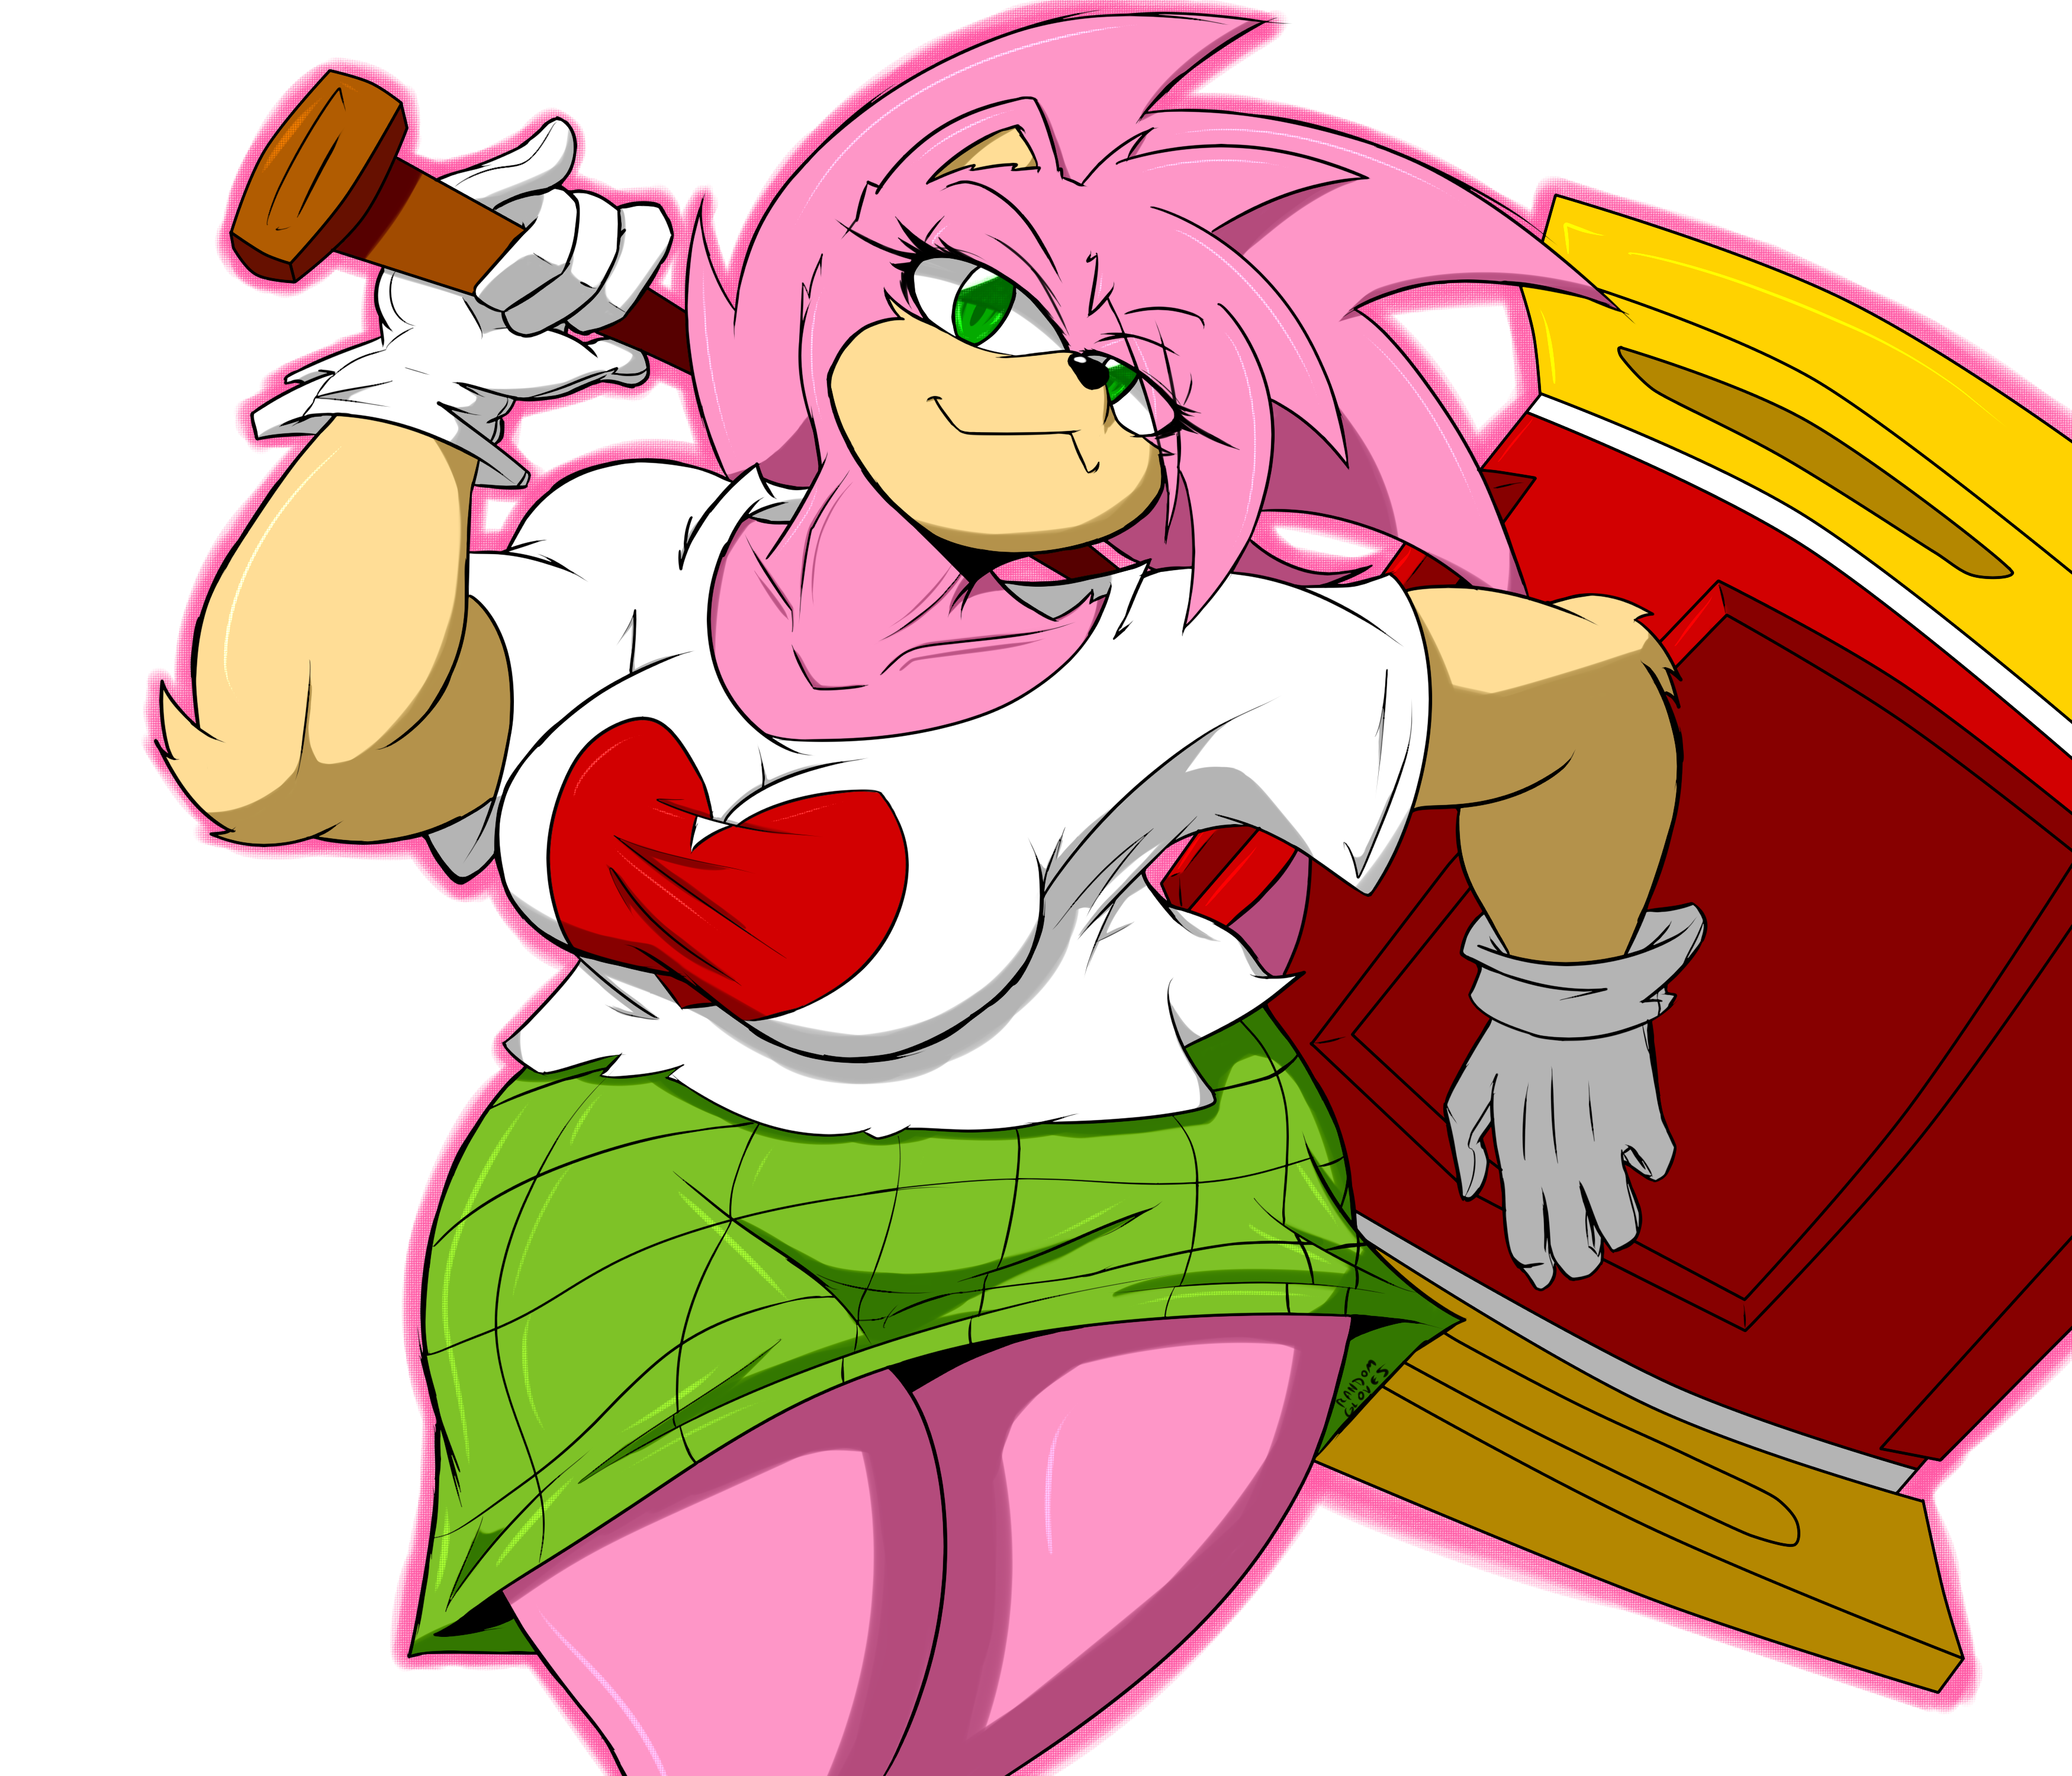 Thicc amy rose